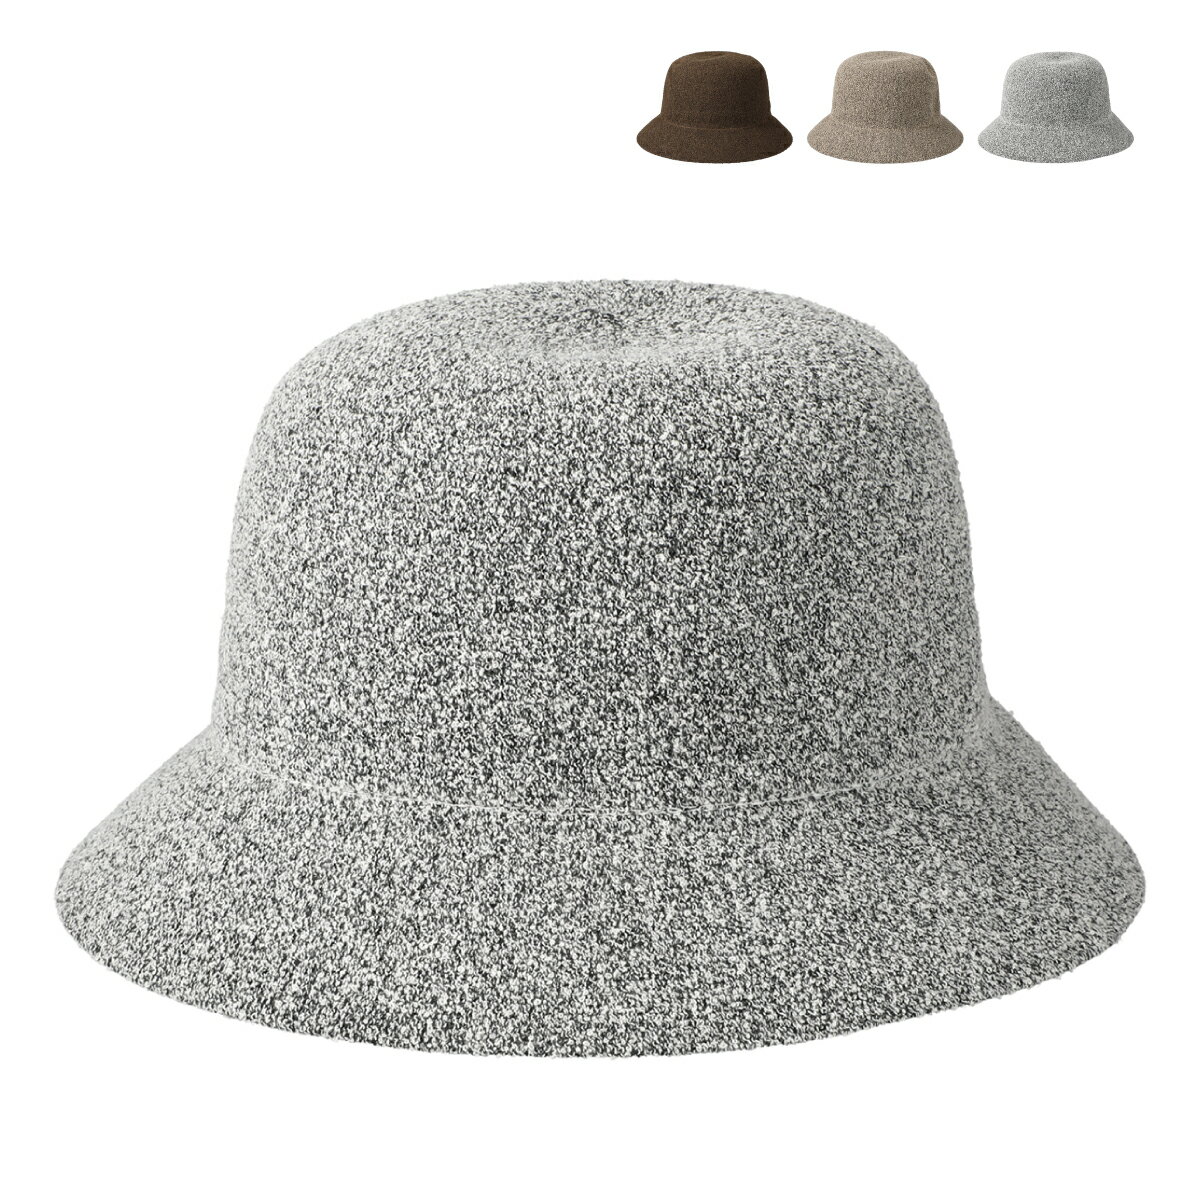 y`LT[zx[VbNG` Mix Thermo Bucket Hat ~bNX T[ oPbgnbg Ȃ y  oPbg nbg ^ꂵɂ _炩 y Xq fB[X Y t ėp ʂ t[TCY S3F bcn-y21749